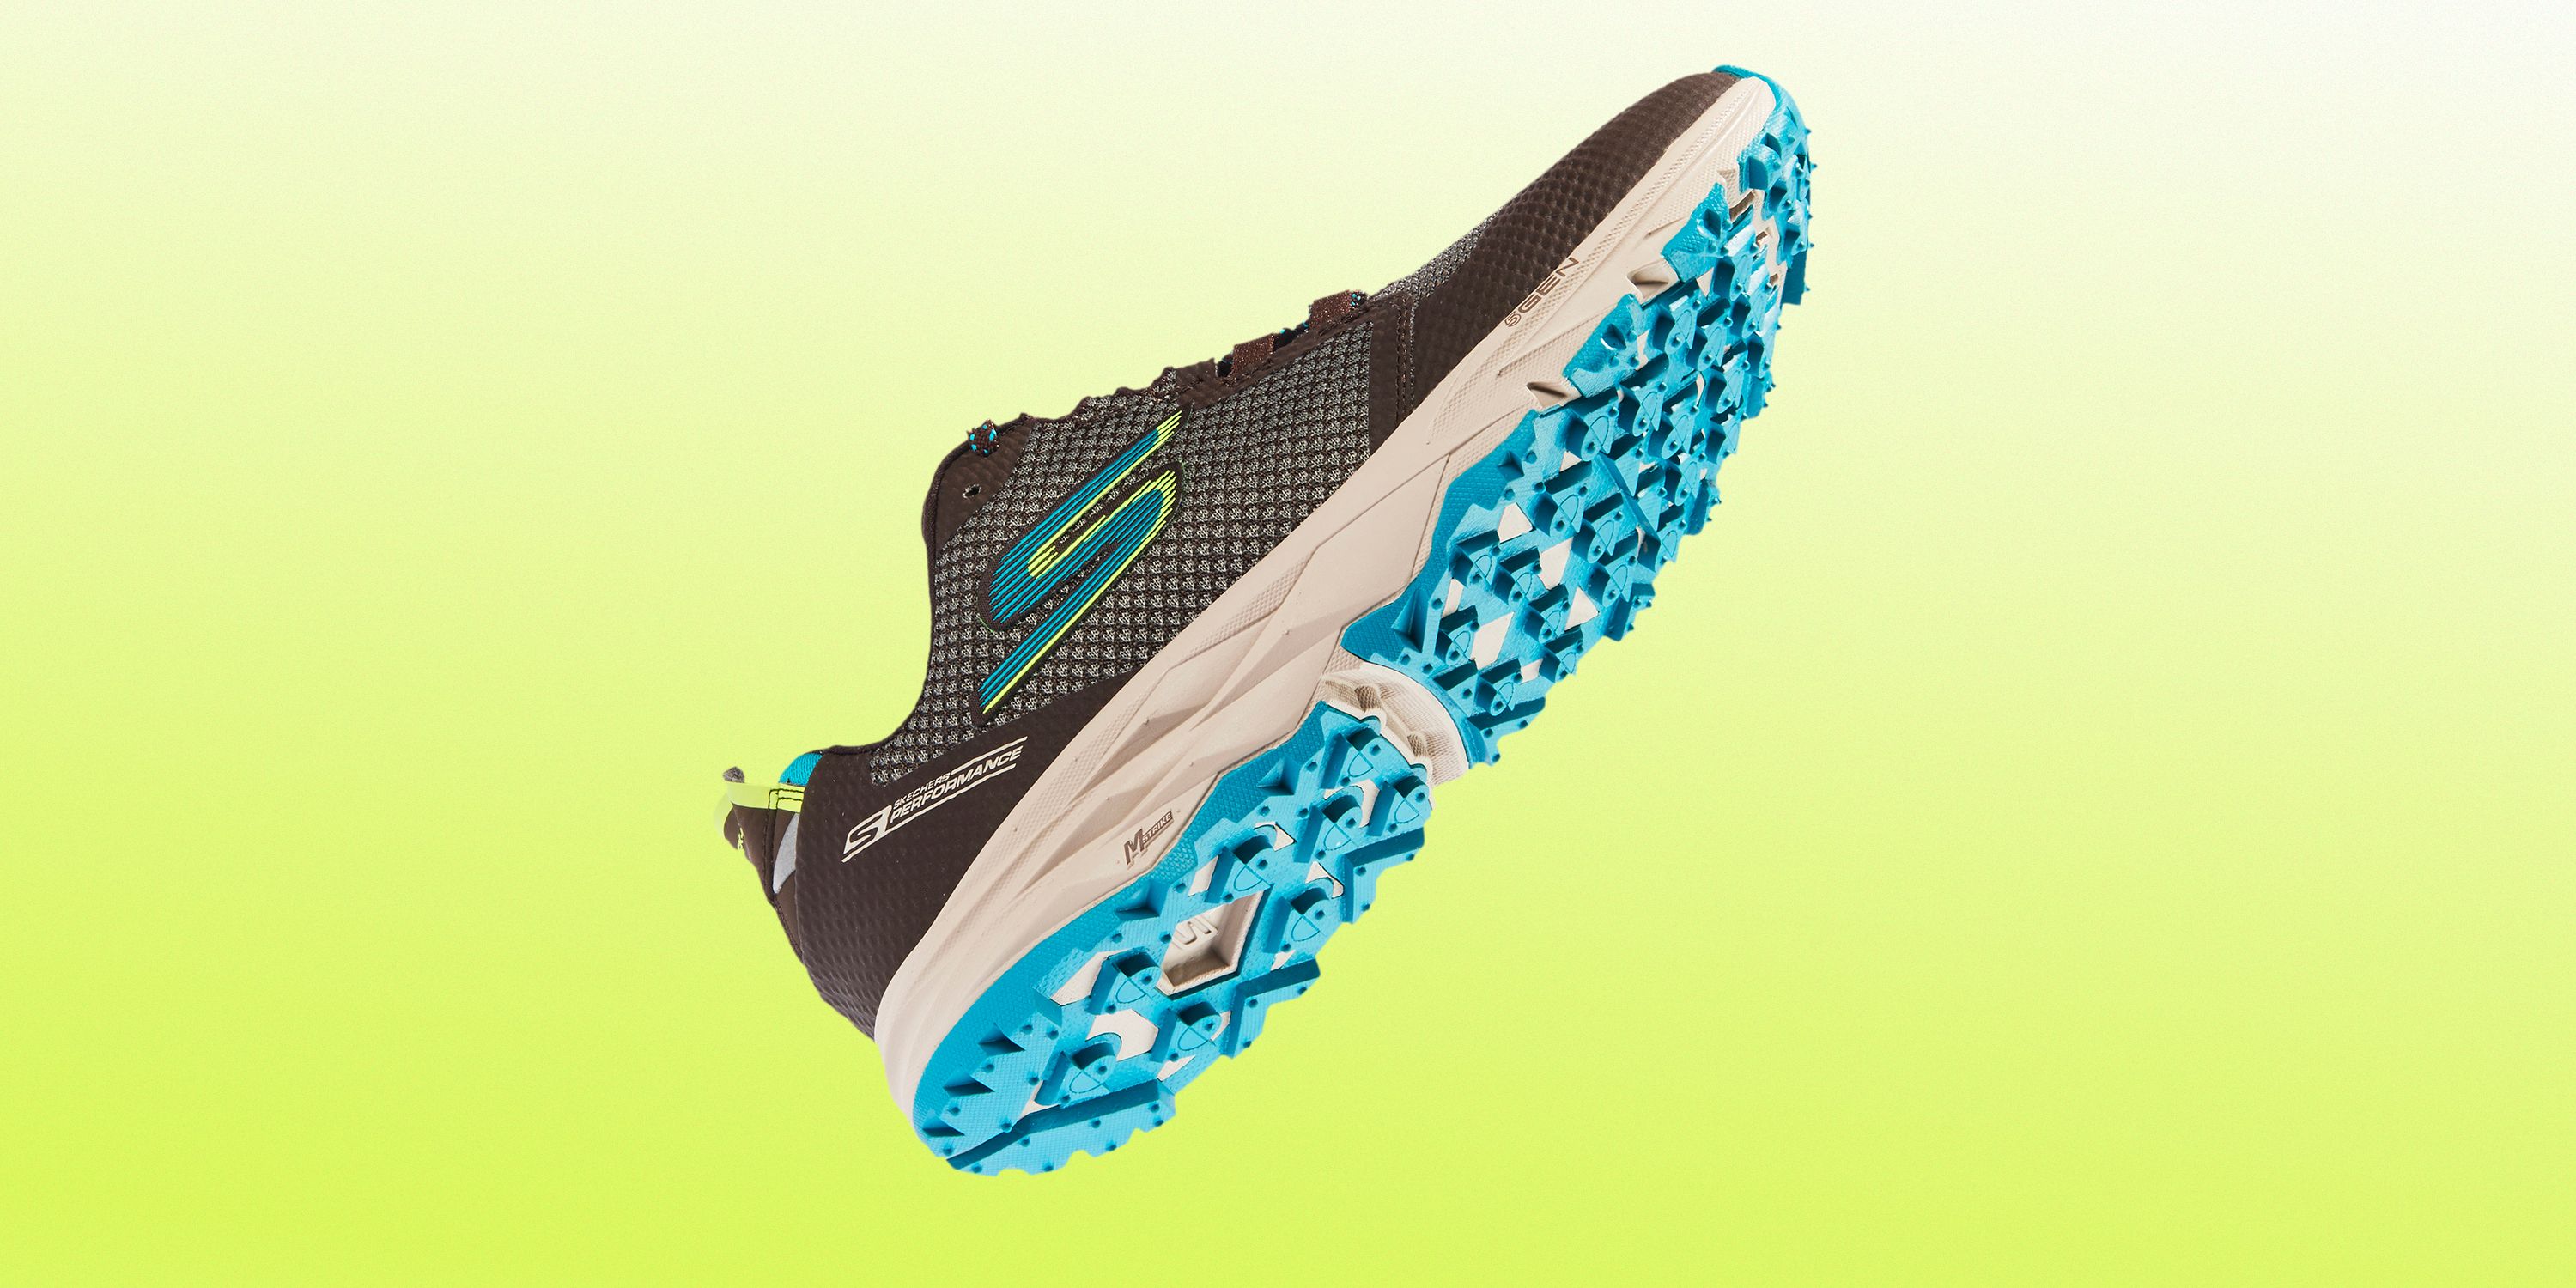 Presentador Mata atmósfera Skechers GOtrail 2 Review 2018 | A Top Pick for Road and Trail Running